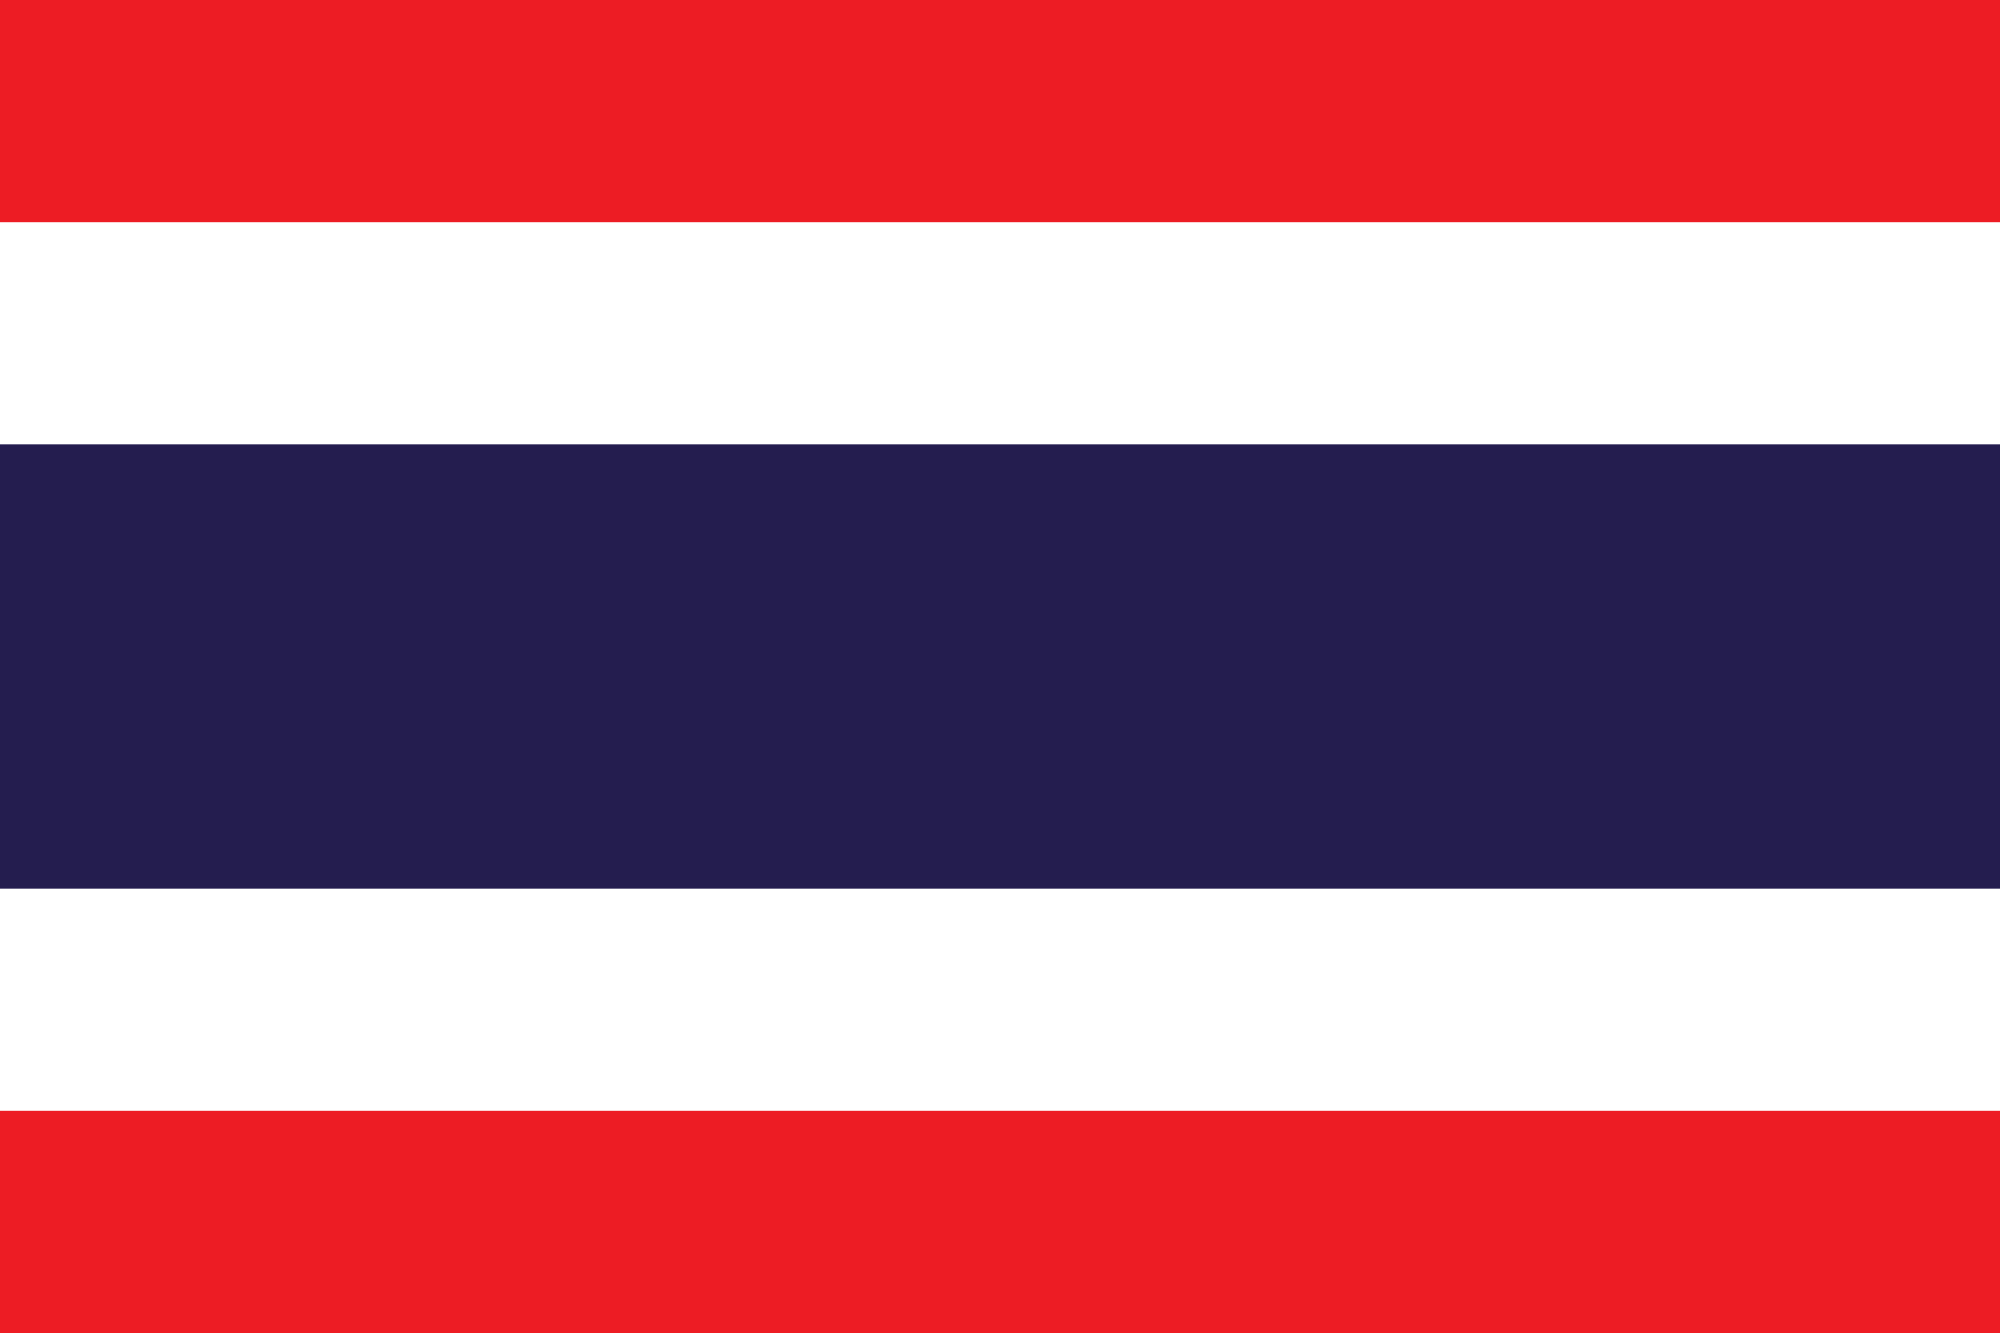 https://upload.wikimedia.org/wikipedia/commons/thumb/a/a9/Flag_of_Thailand.svg/2000px-Flag_of_Thailand.svg.png